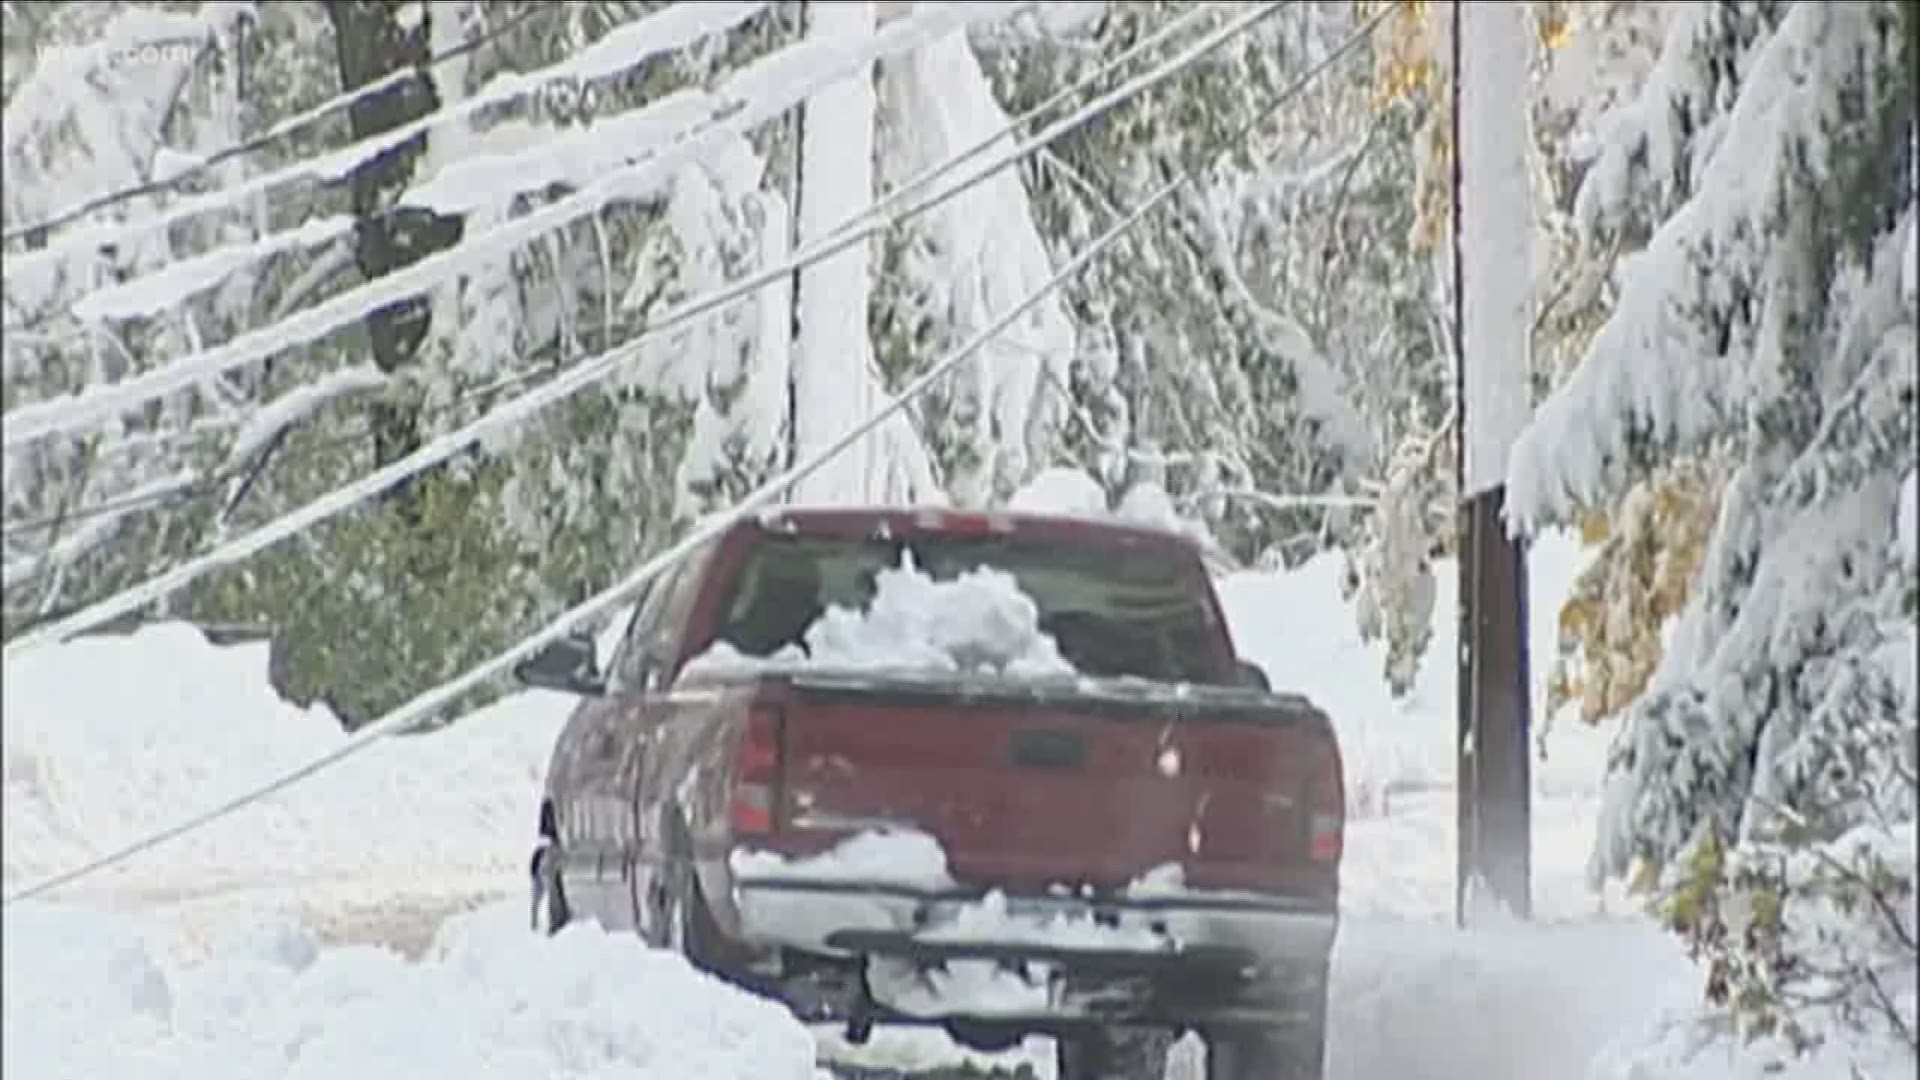 After deadliest storm in decades, Buffalo faces more snow